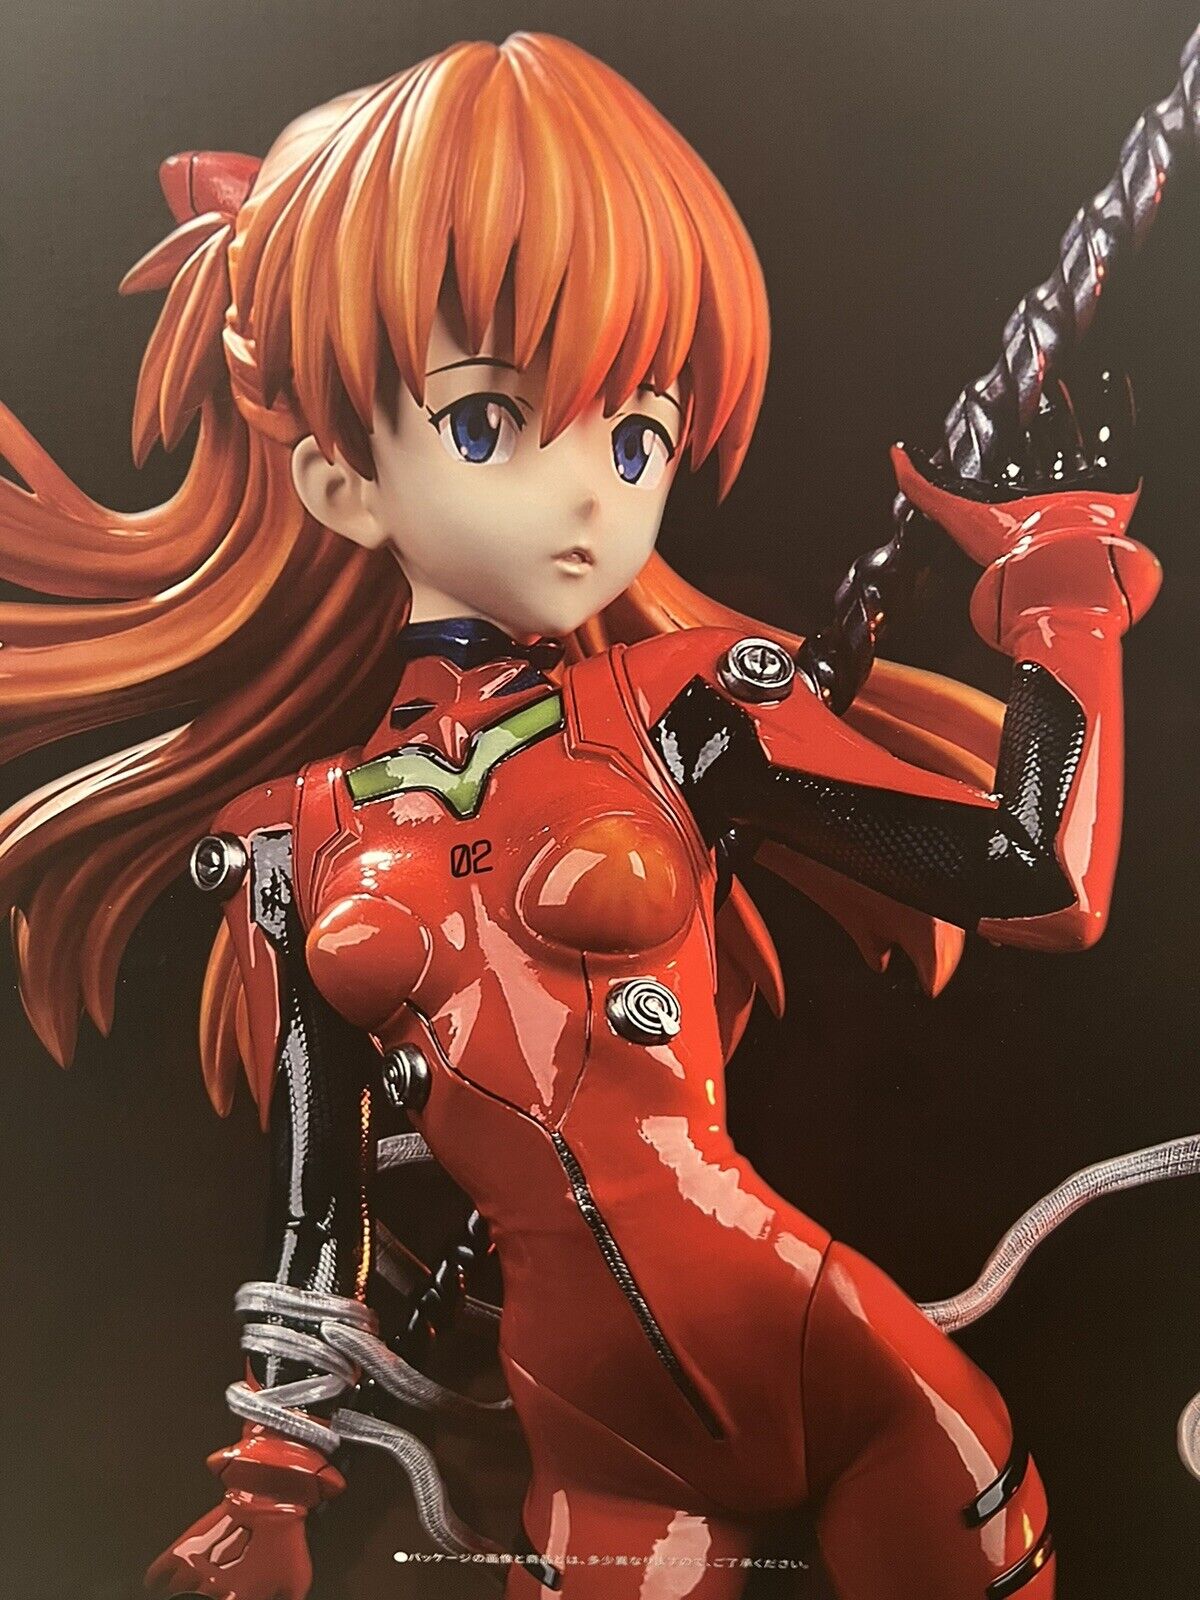 Star Space Evangelion Wonder Statue Asuka Langley 1/4 Scale Figure Anime toy